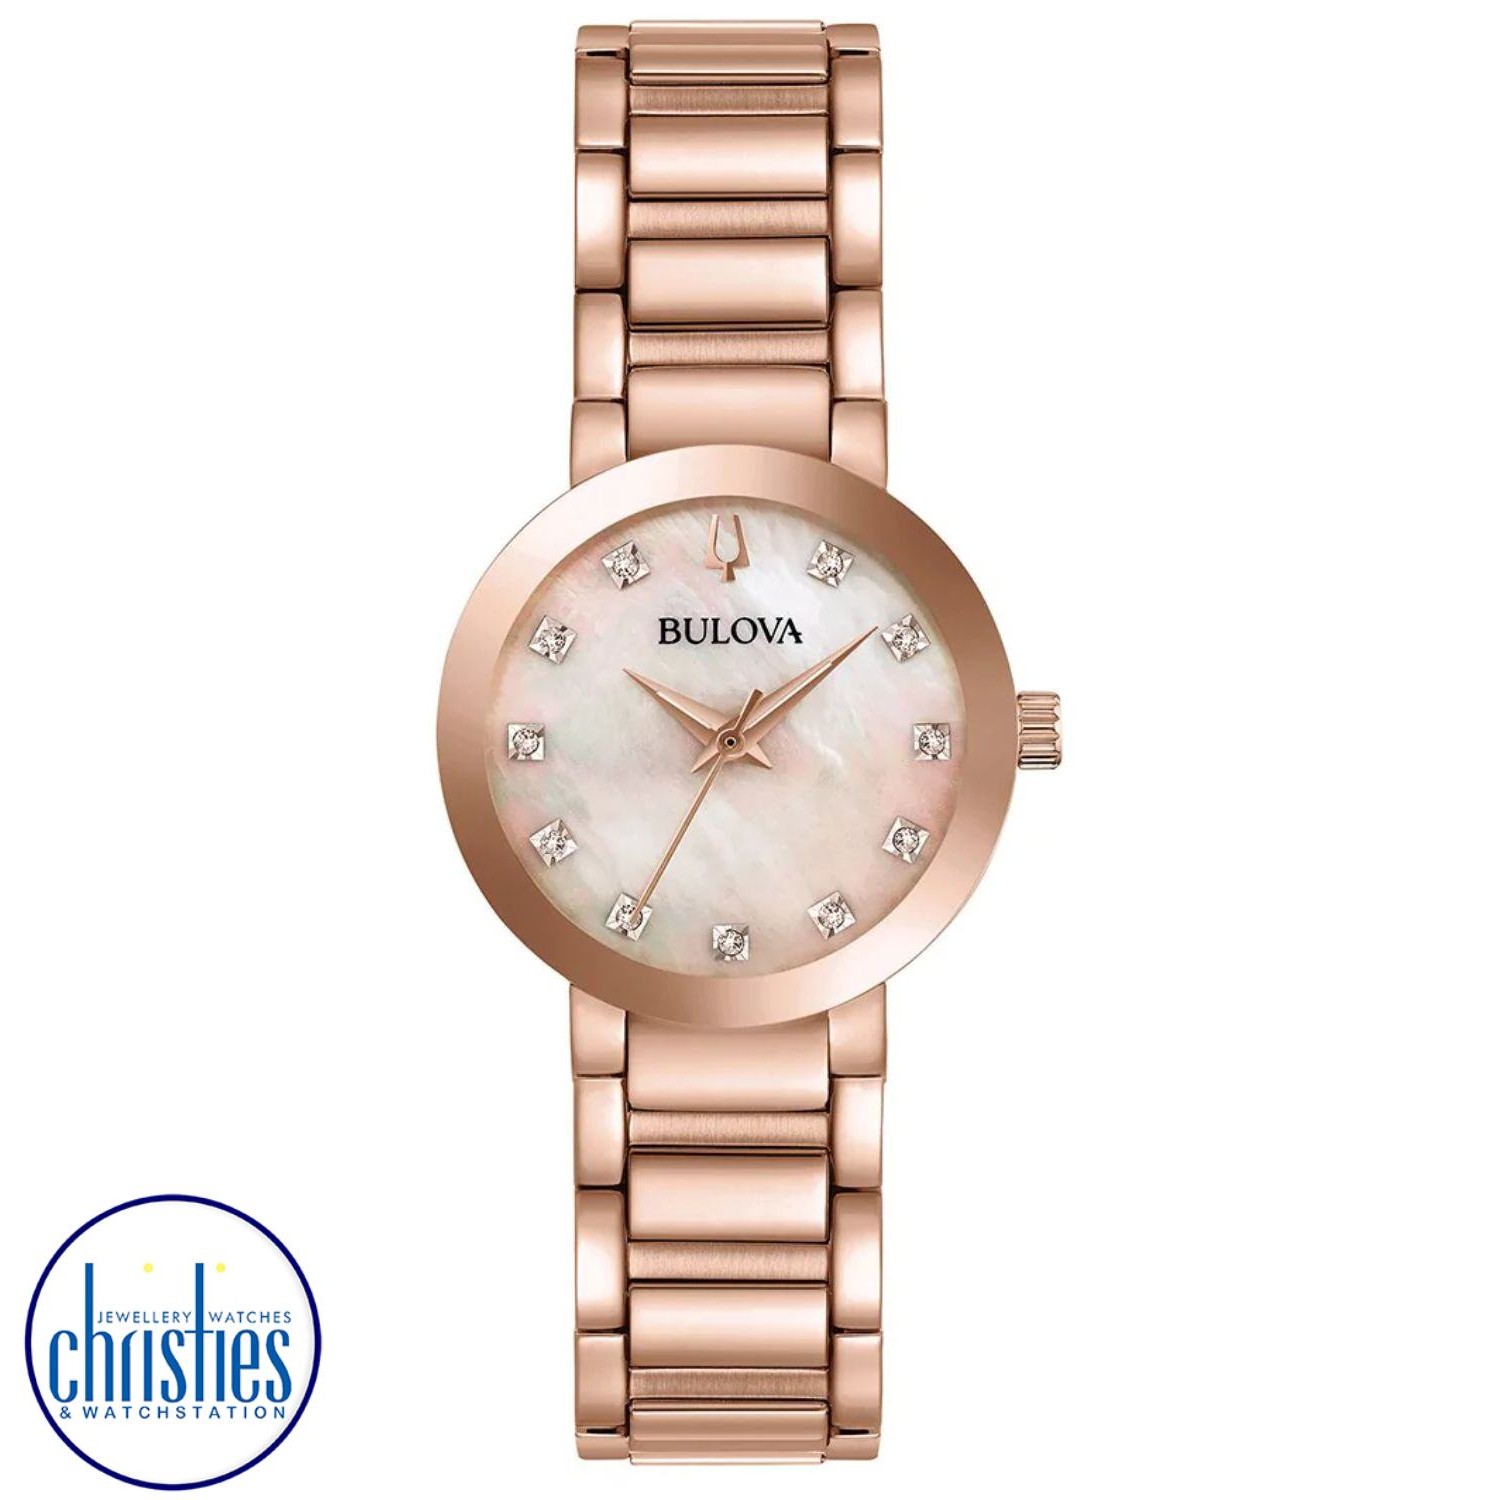 97P132 Bulova Women's Diamond Watch. The Bulova 97P132 is a luxurious timepiece that combines rose gold-tone stainless steel with 11 diamonds that are individually hand set on a rose-gold mother-of-pearl dial.